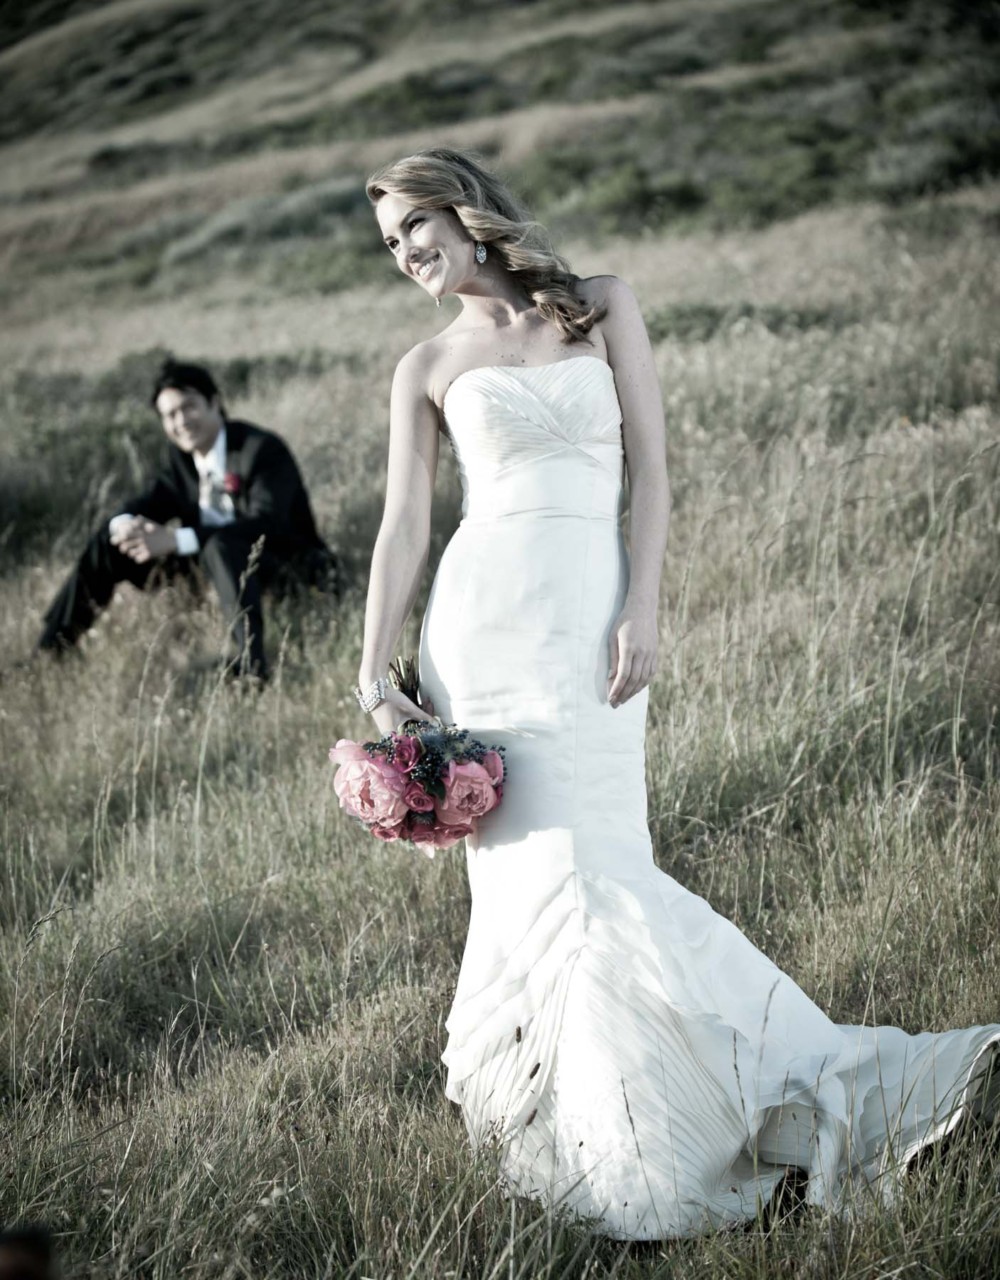 Looking for a professional wedding photographer in Big Lake?